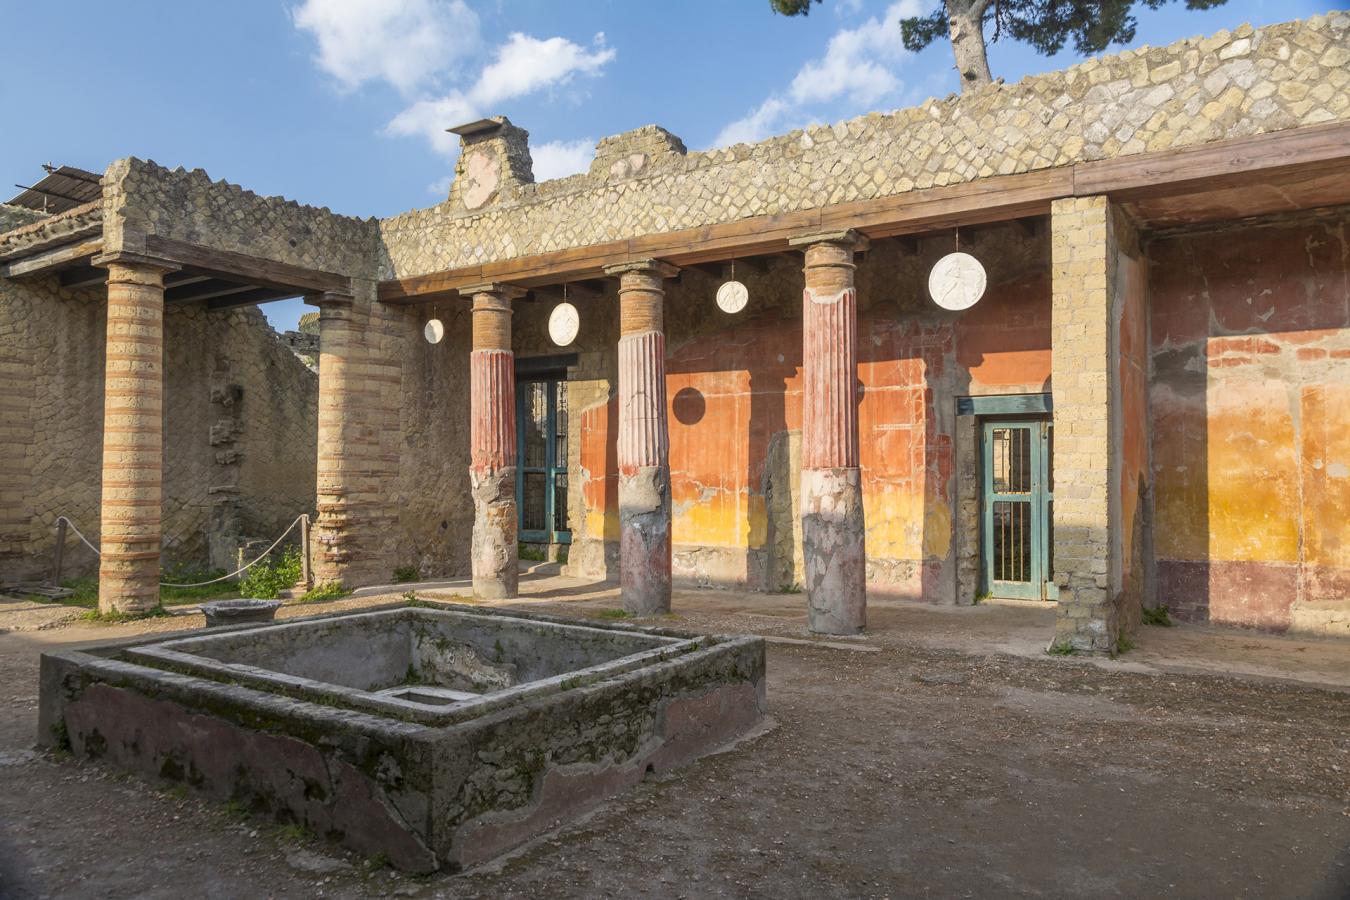 A journey through the history of Pompeii and Herculaneum